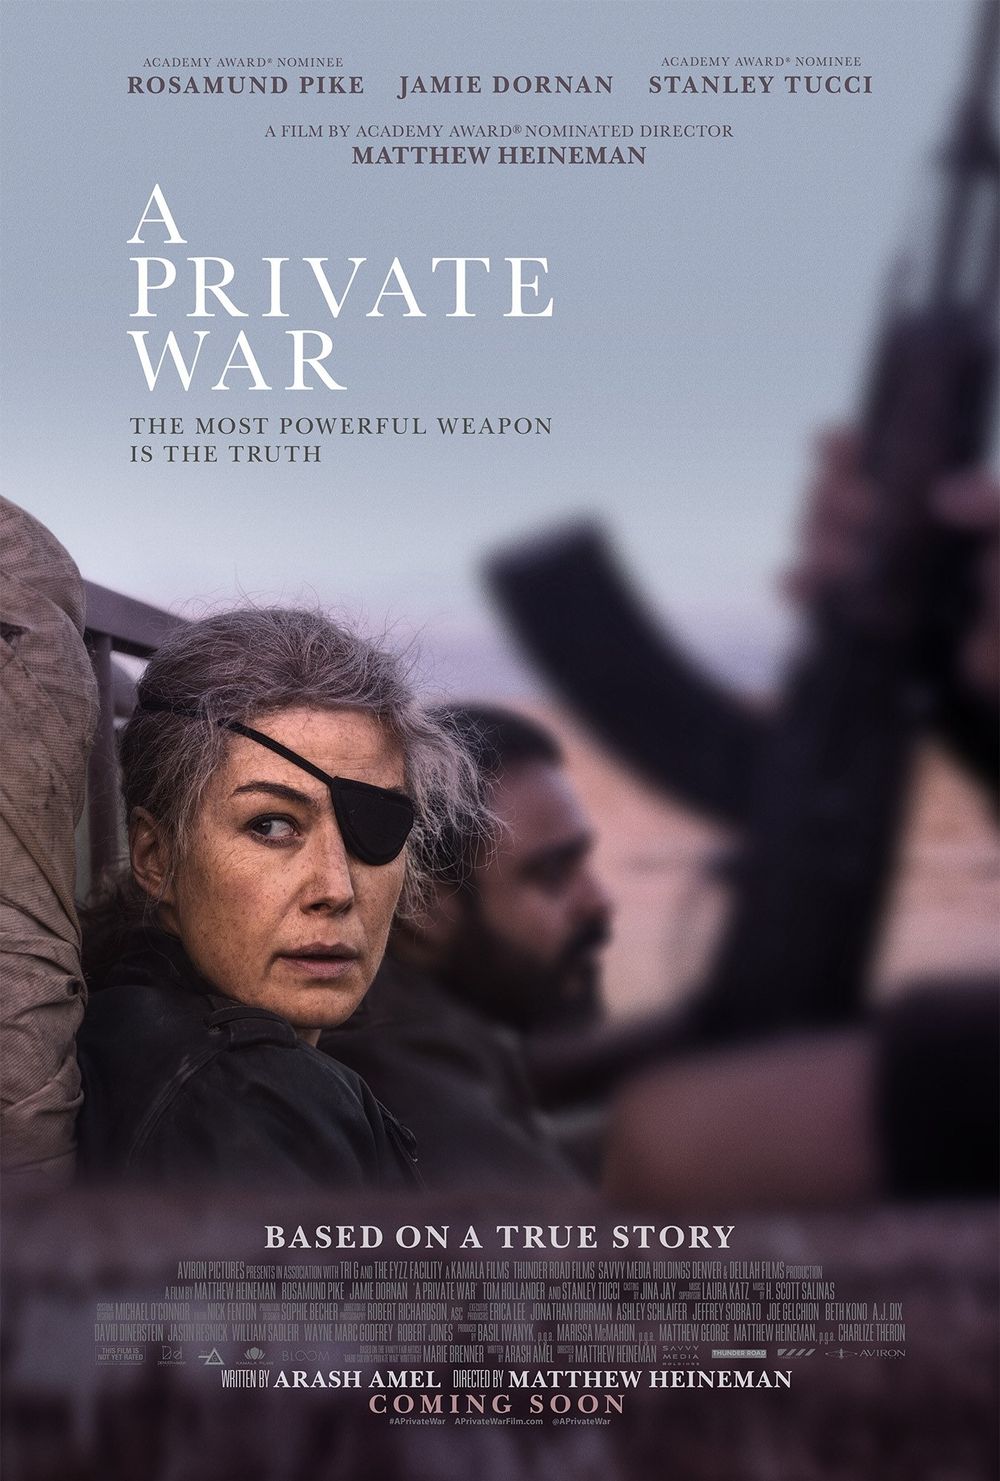 A Private War Movie Review